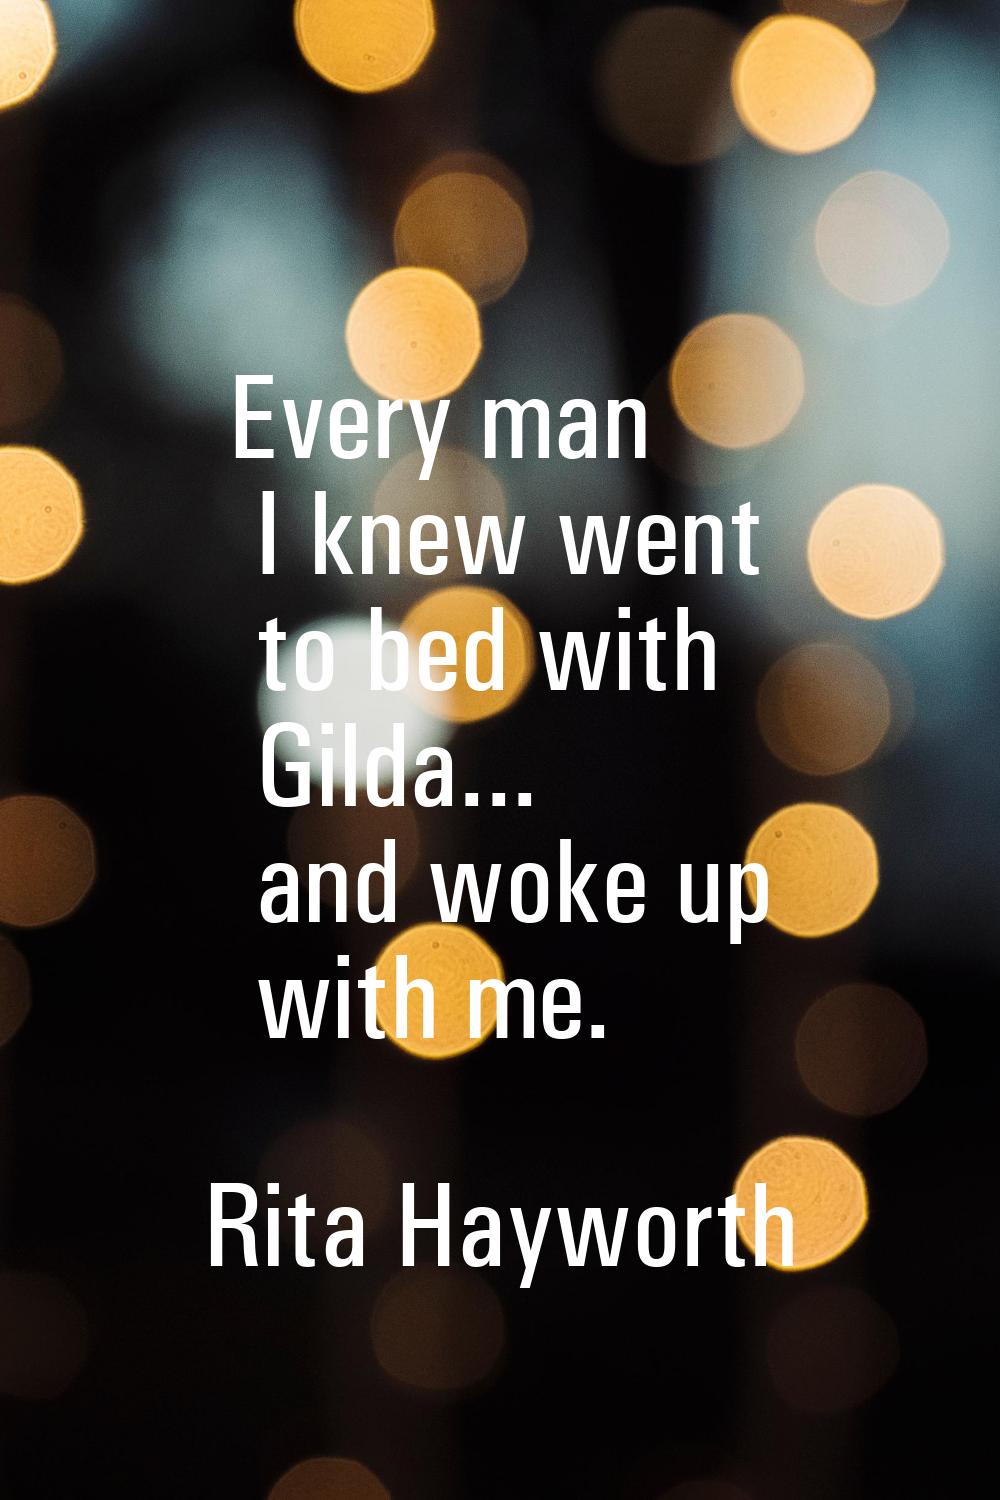 Every man I knew went to bed with Gilda... and woke up with me.